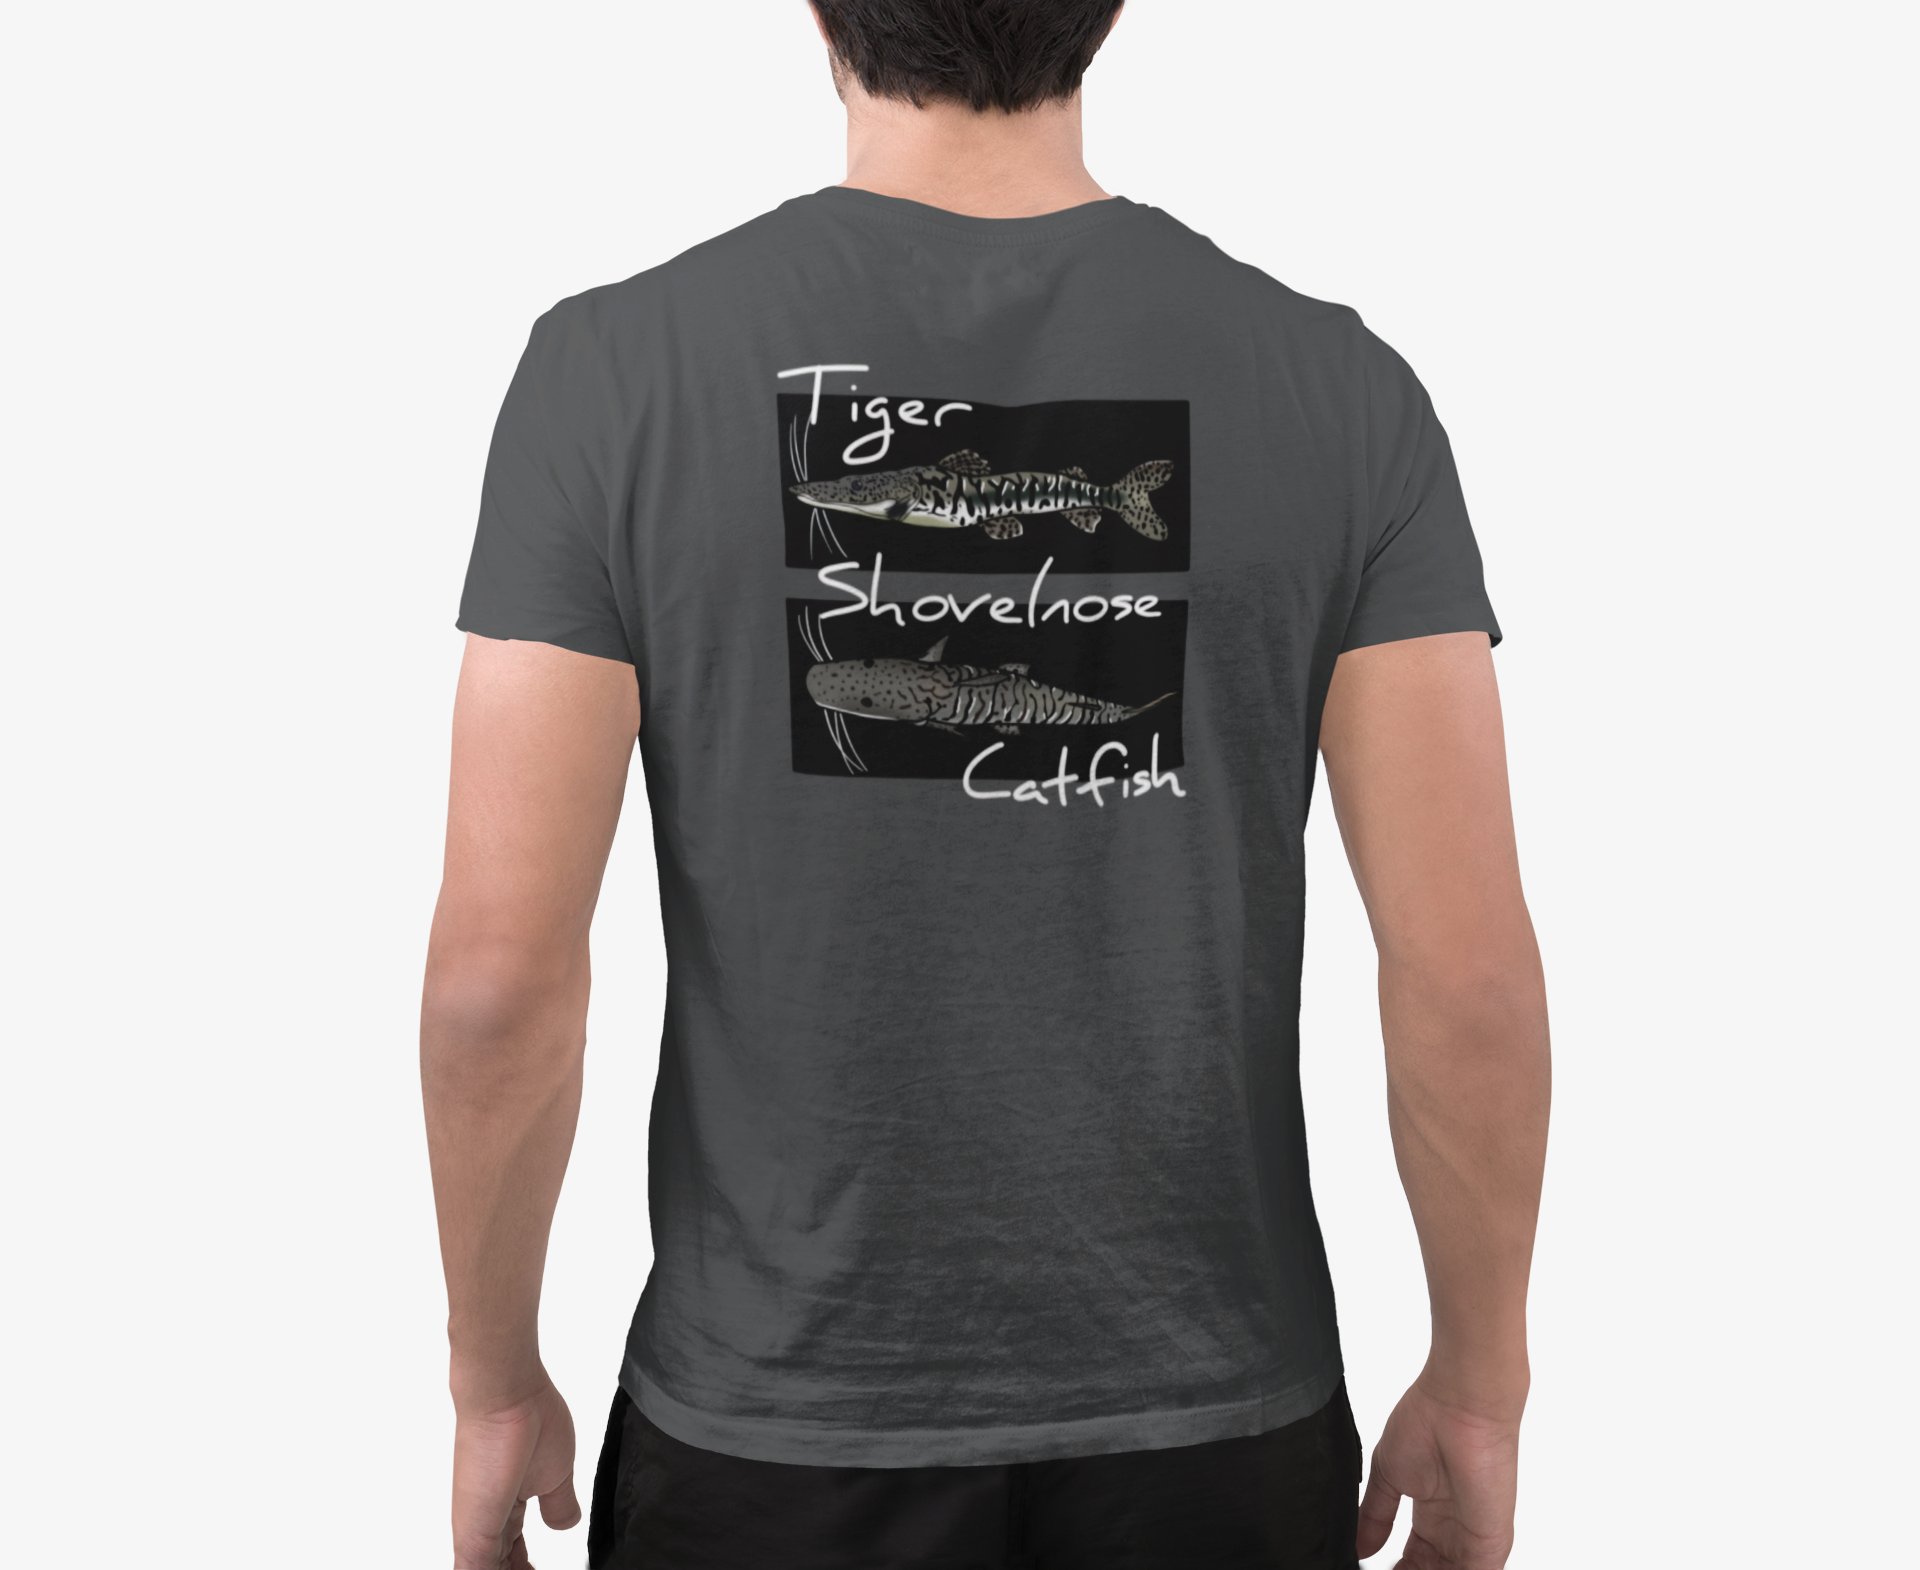 The Tank Life Apparel tiger shovelnose catfish design on a classic tee with our custom TLA sleeve label. Gray catfish with stripes.